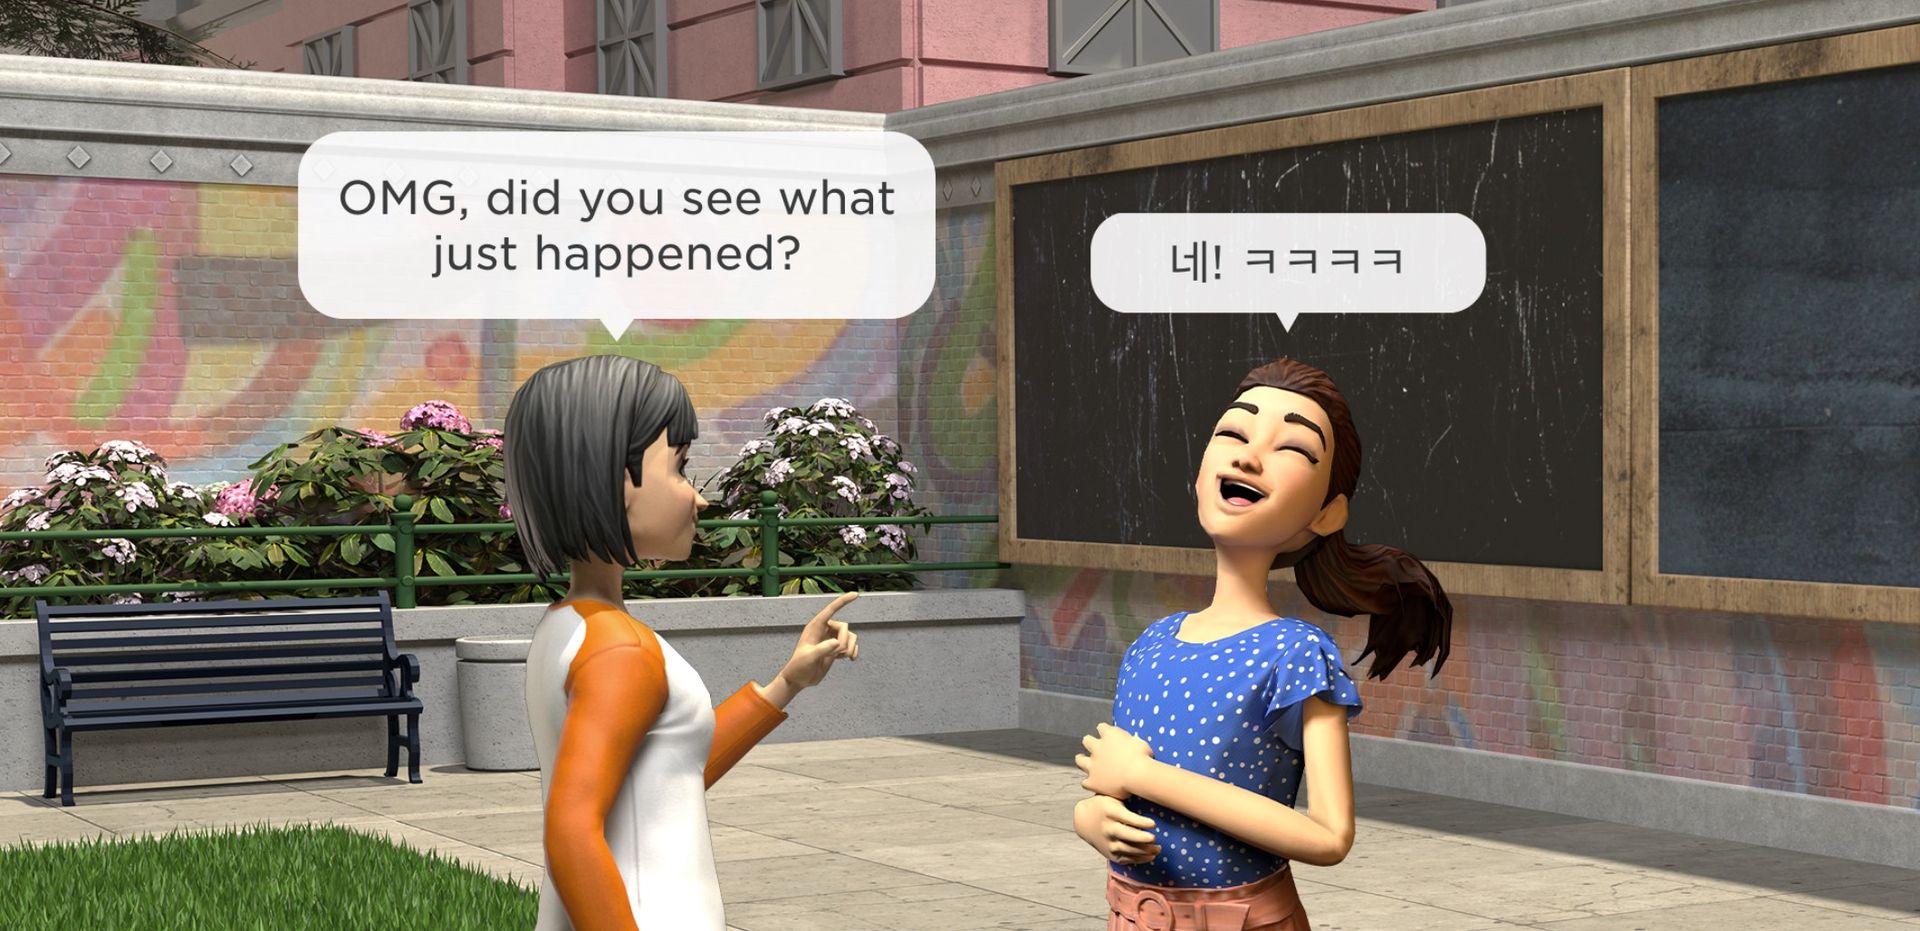 Roblox Auto Translate removes language barriers in-game